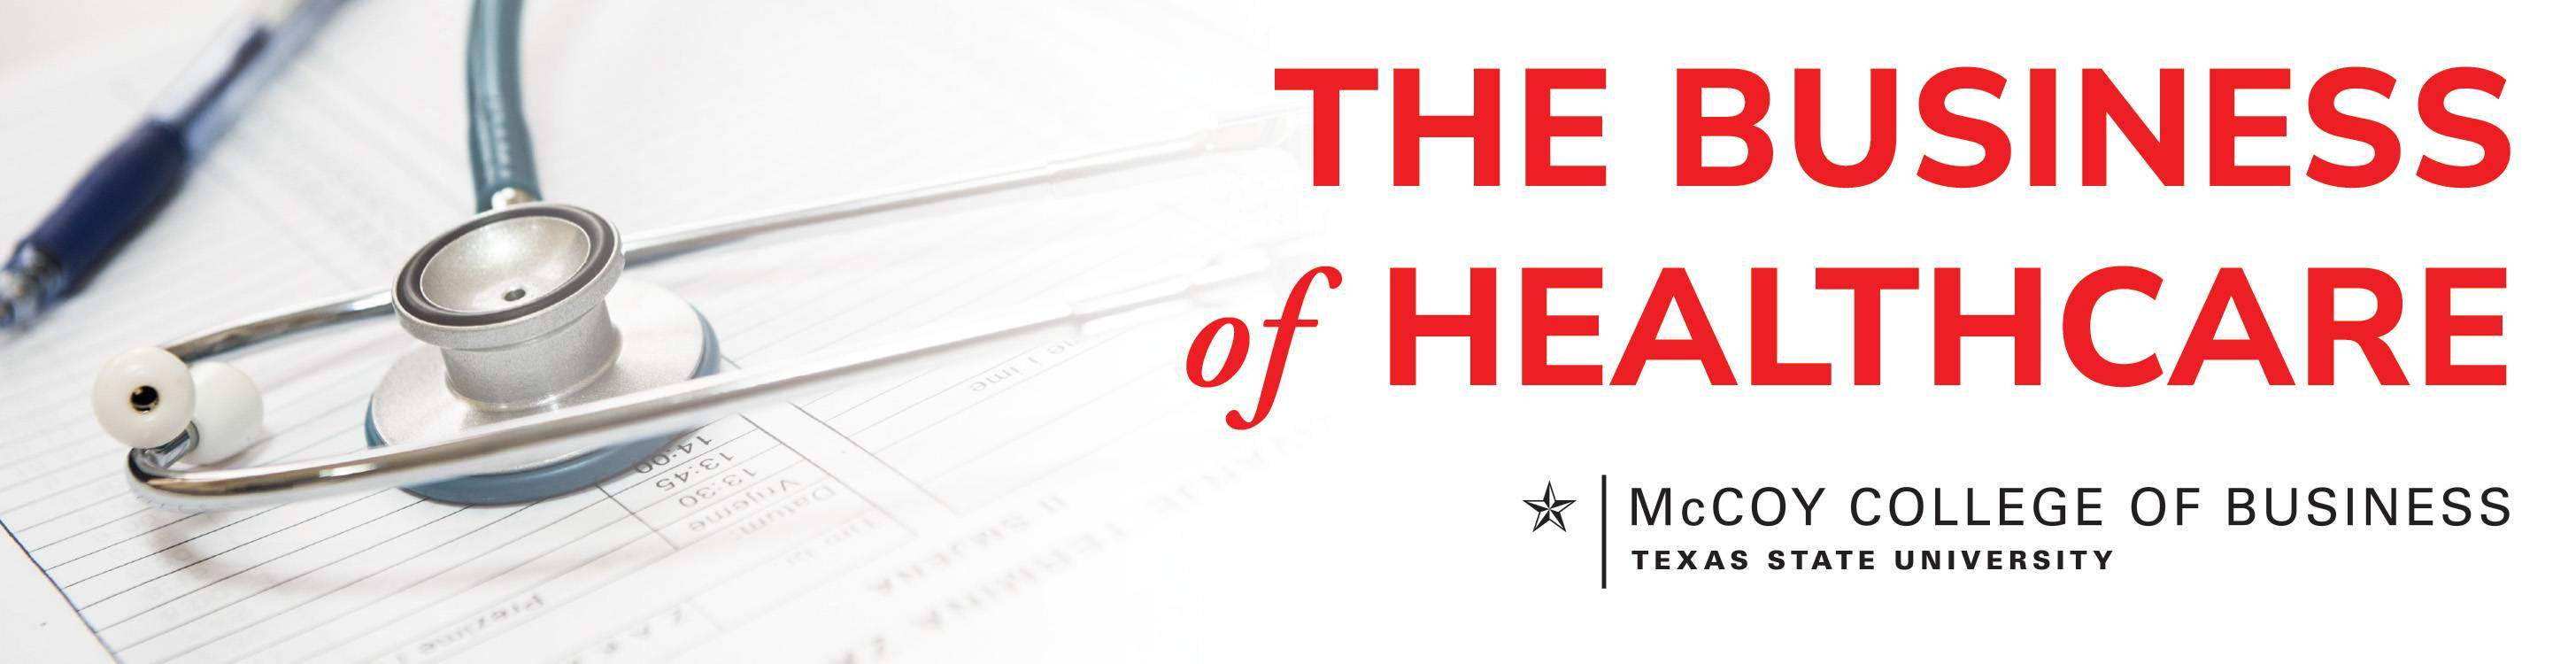 White graphic with stethoscope and medical notes and red text: "The Business of Healthcare, free online event , April 19, 2022" and McCoy College logo"